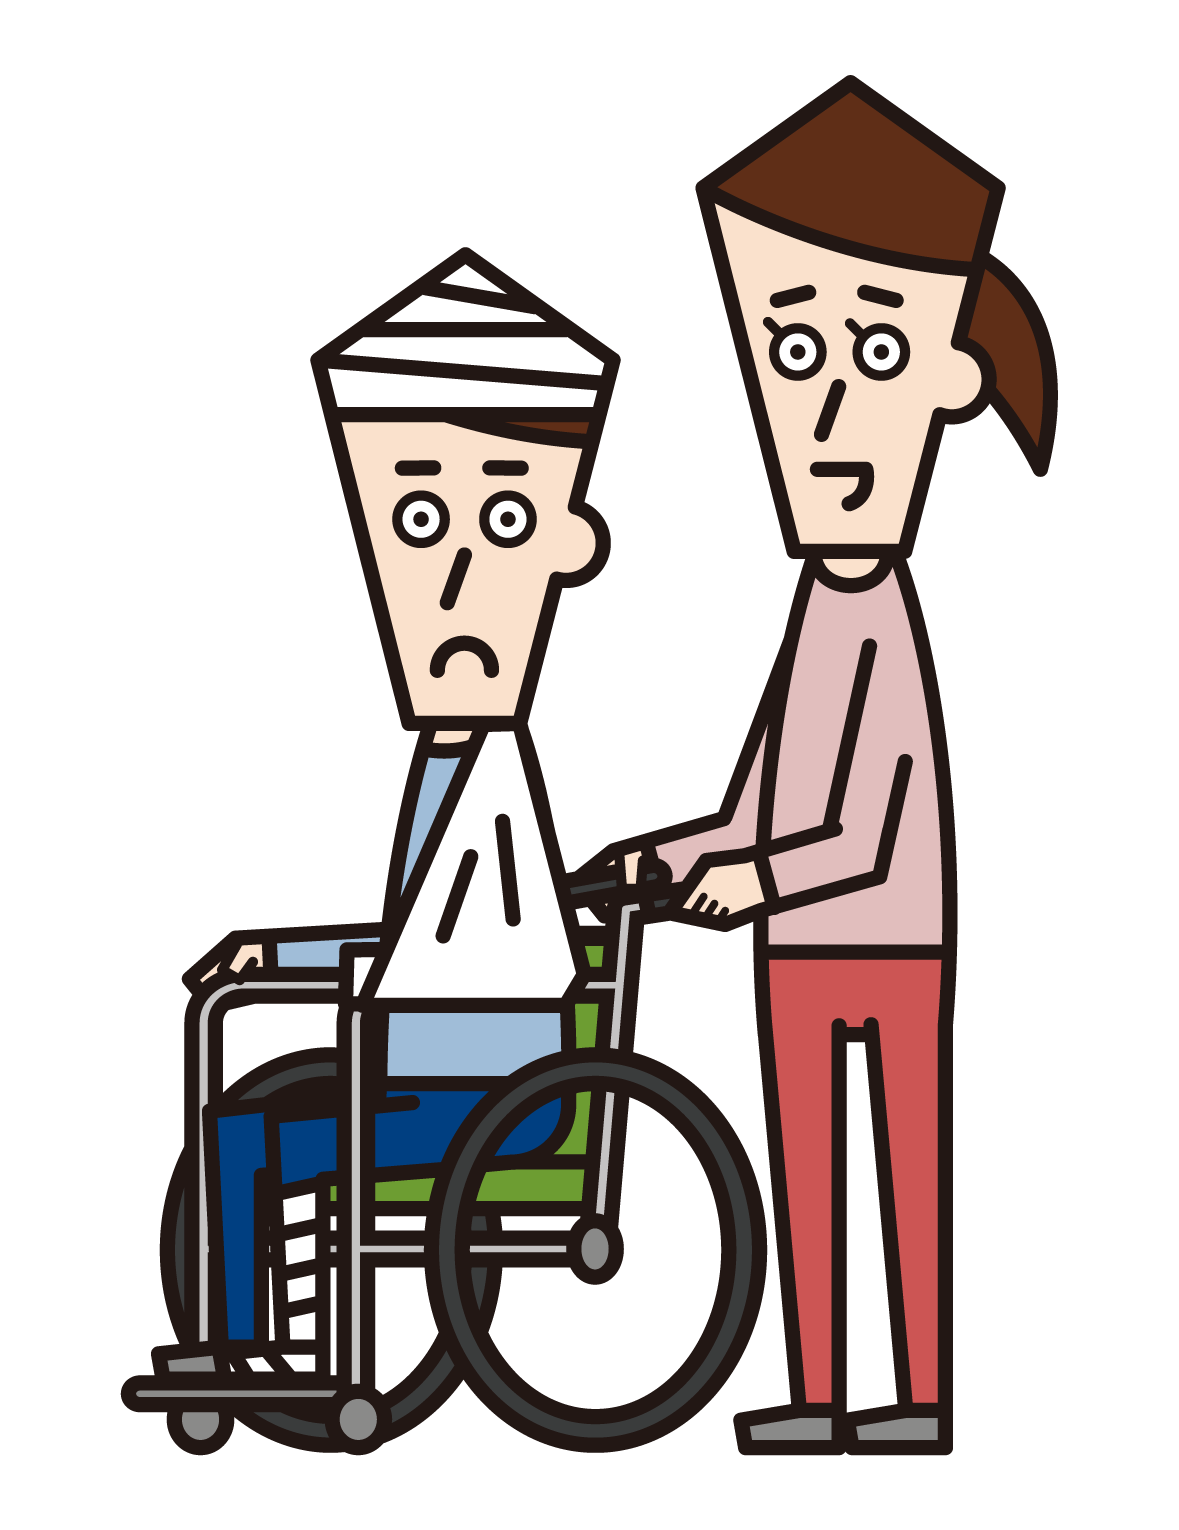 Illustration of a man who is seriously injured and in a wheelchair